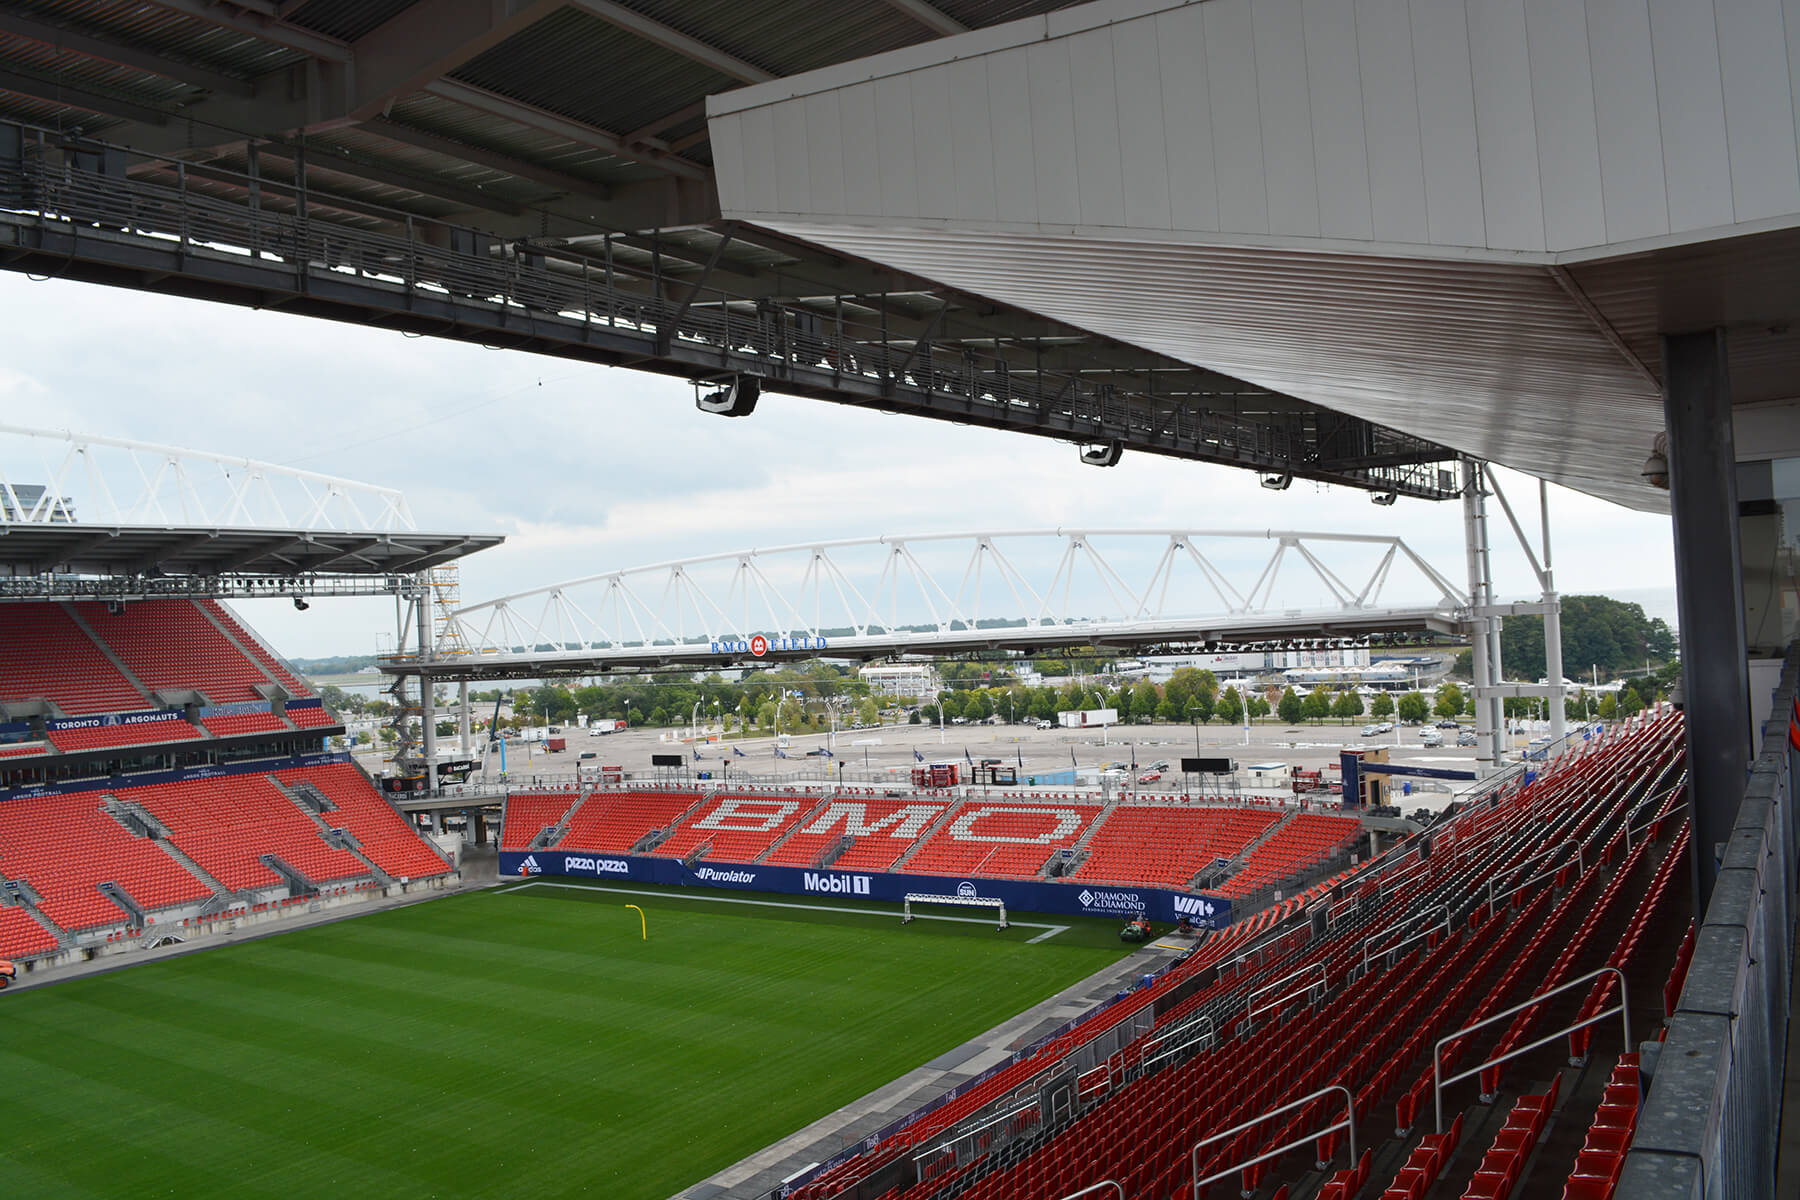 BMO Field Expansion